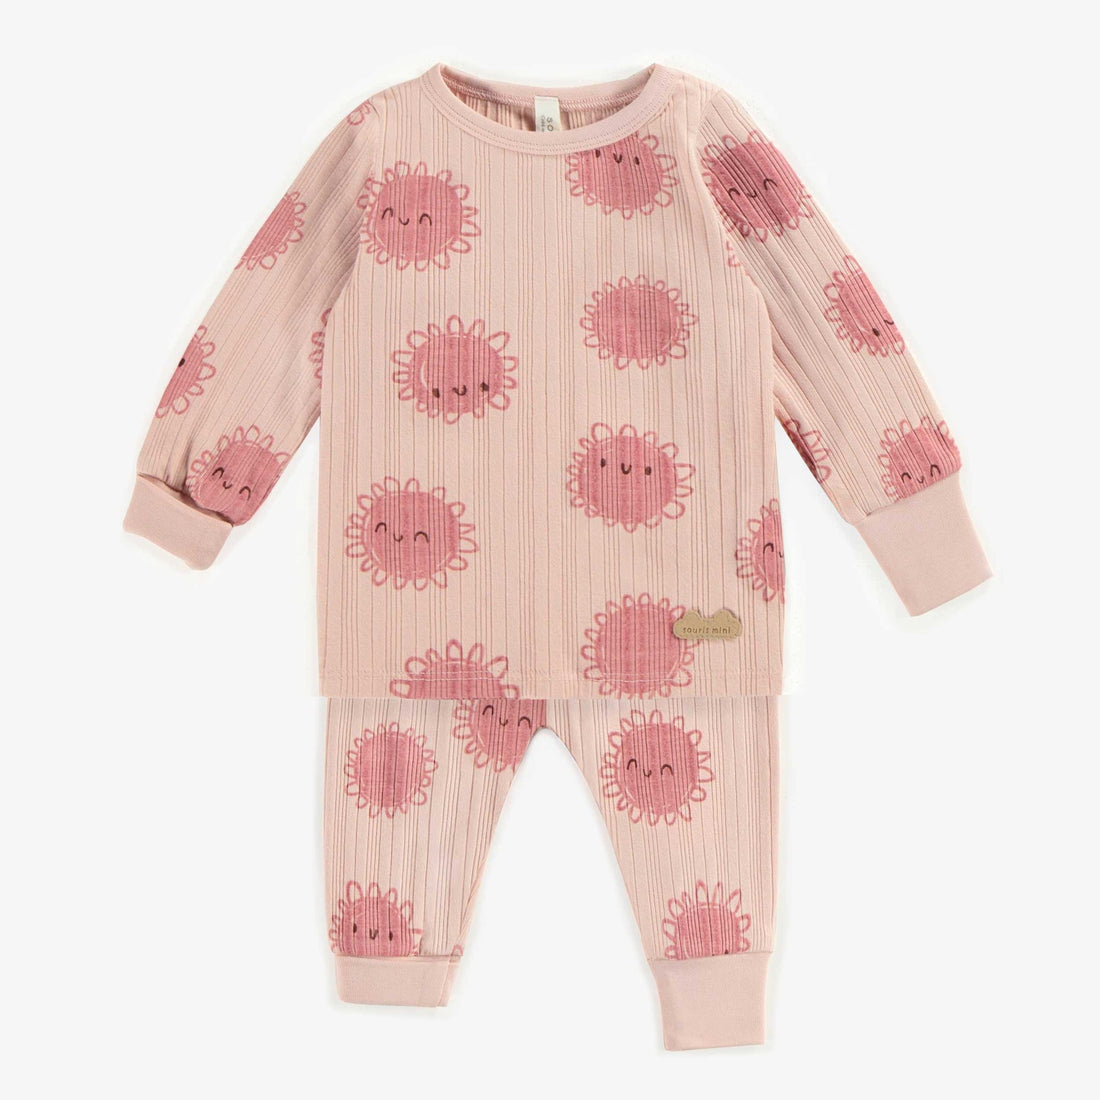 PINK PATTERNED TWO-PIECE PAJAMAS IN COTTON, NEWBORN